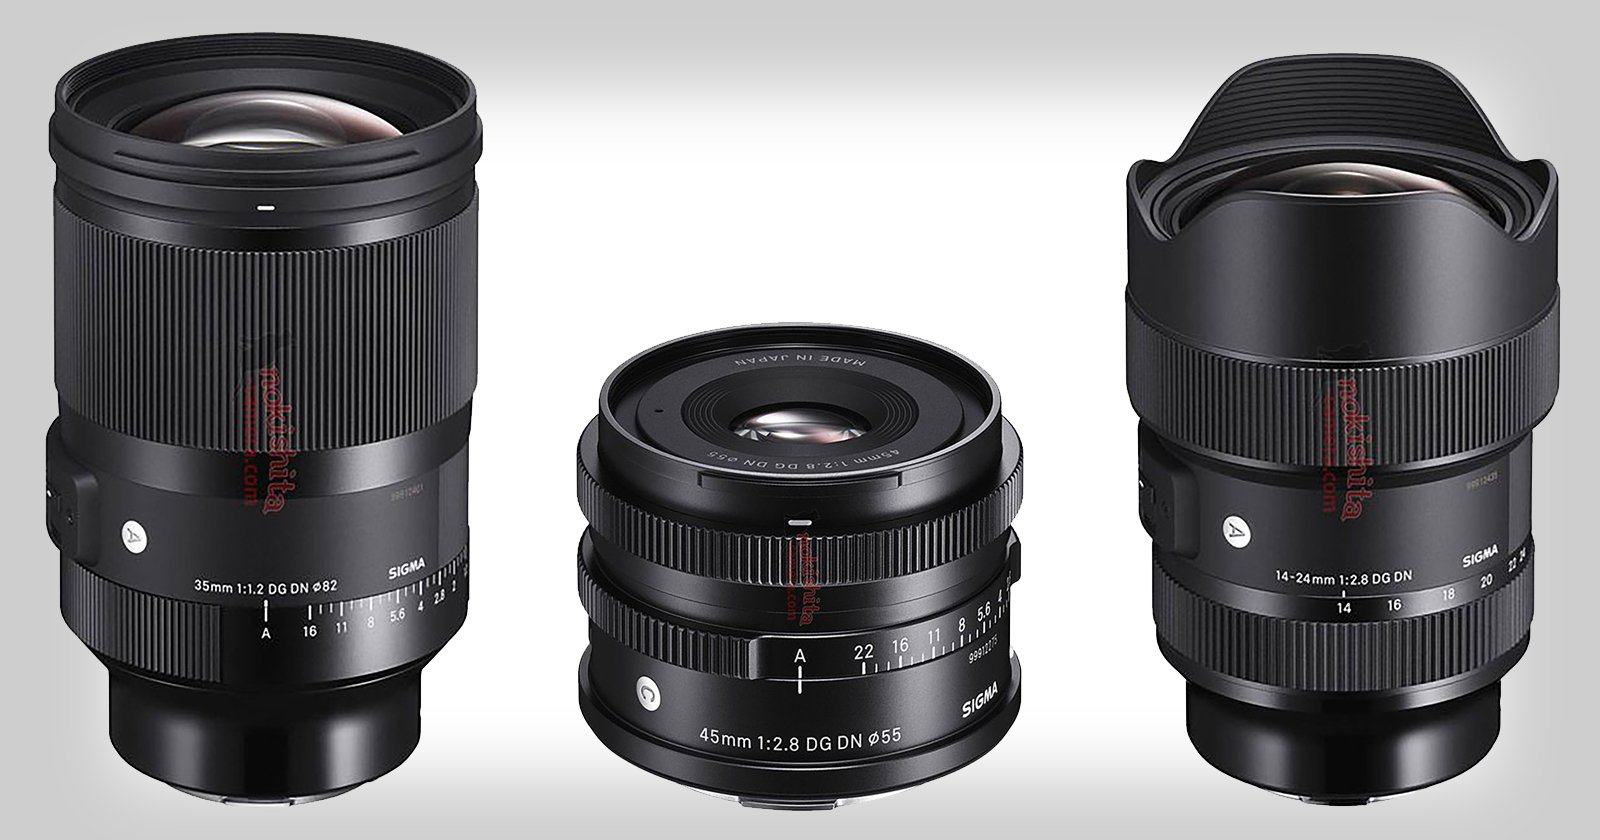 Photos And Pricing Of Sigma 14 24mm F 2 8 35mm F 1 2 And 45mm F 2 8